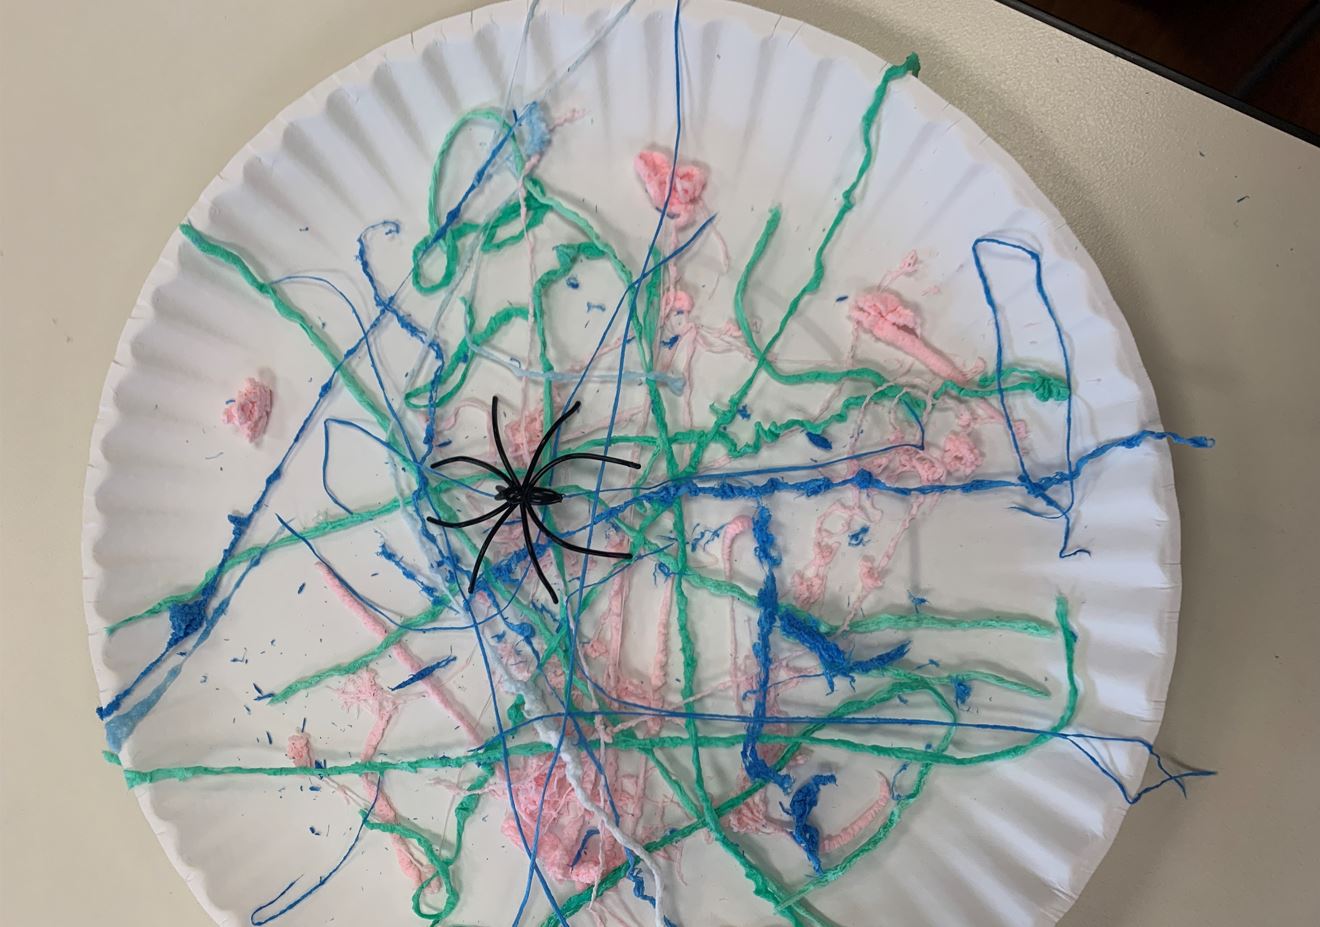 Silly string on a paper plate with a plastic spider in the center